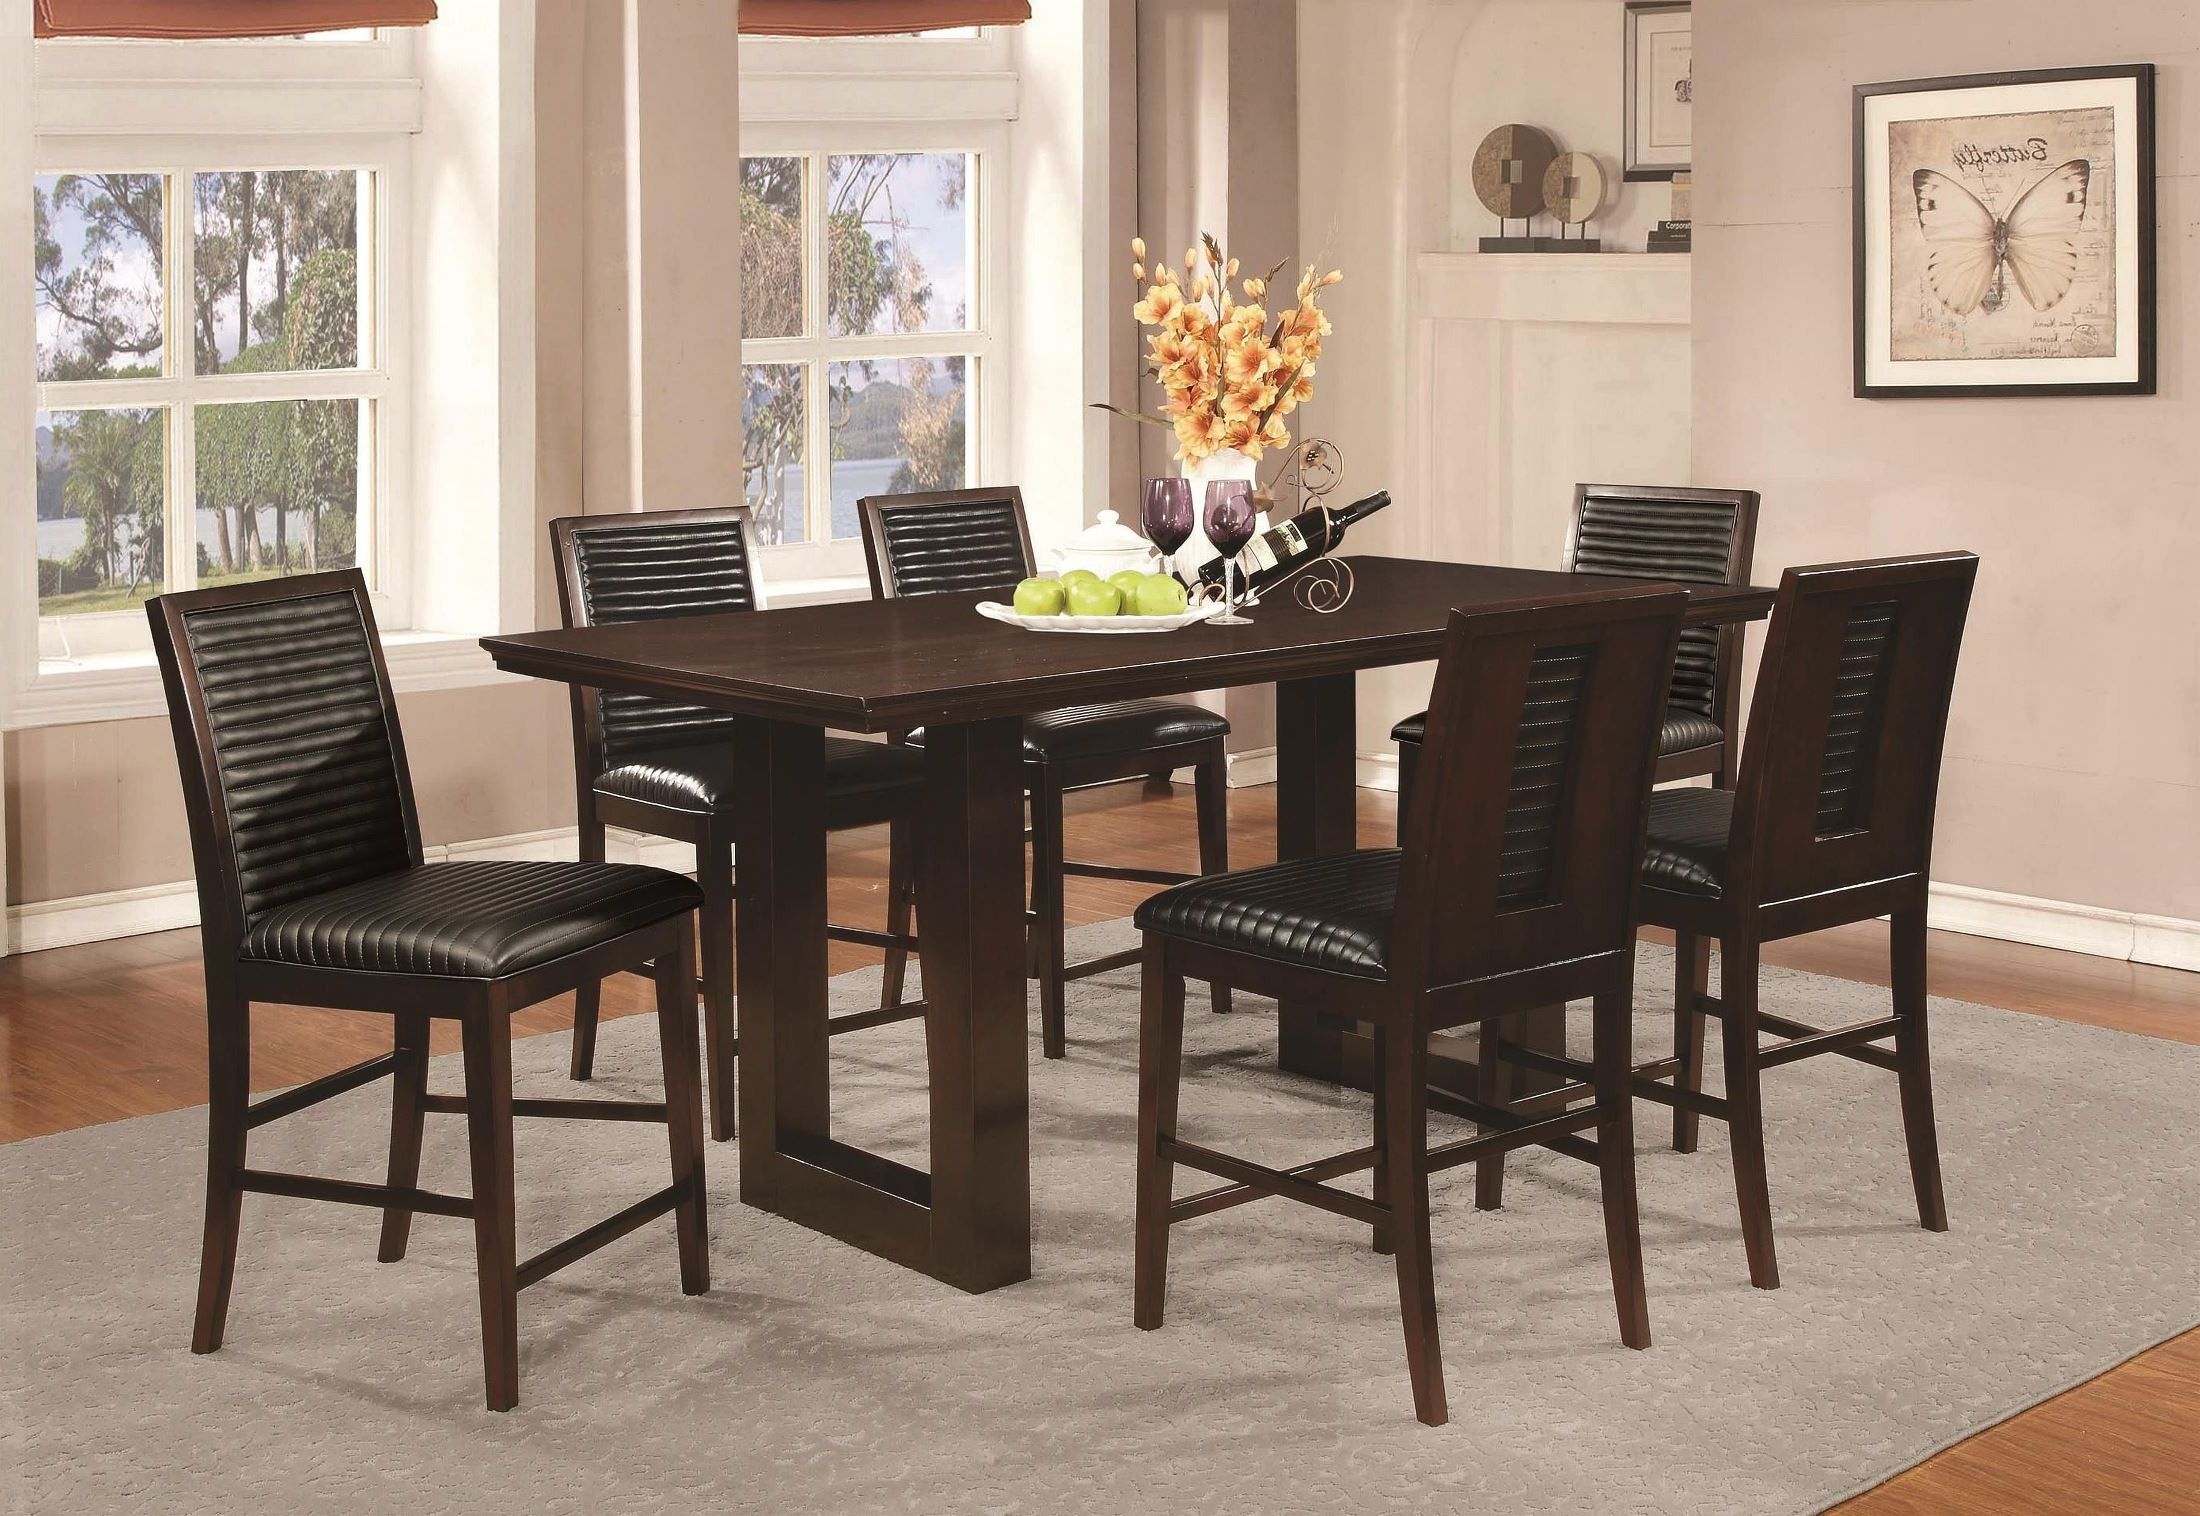 Preferred Counter Height Pedestal Dining Tables Intended For Chester Rectangular Pedestal Counter Height Dining Set (View 15 of 20)